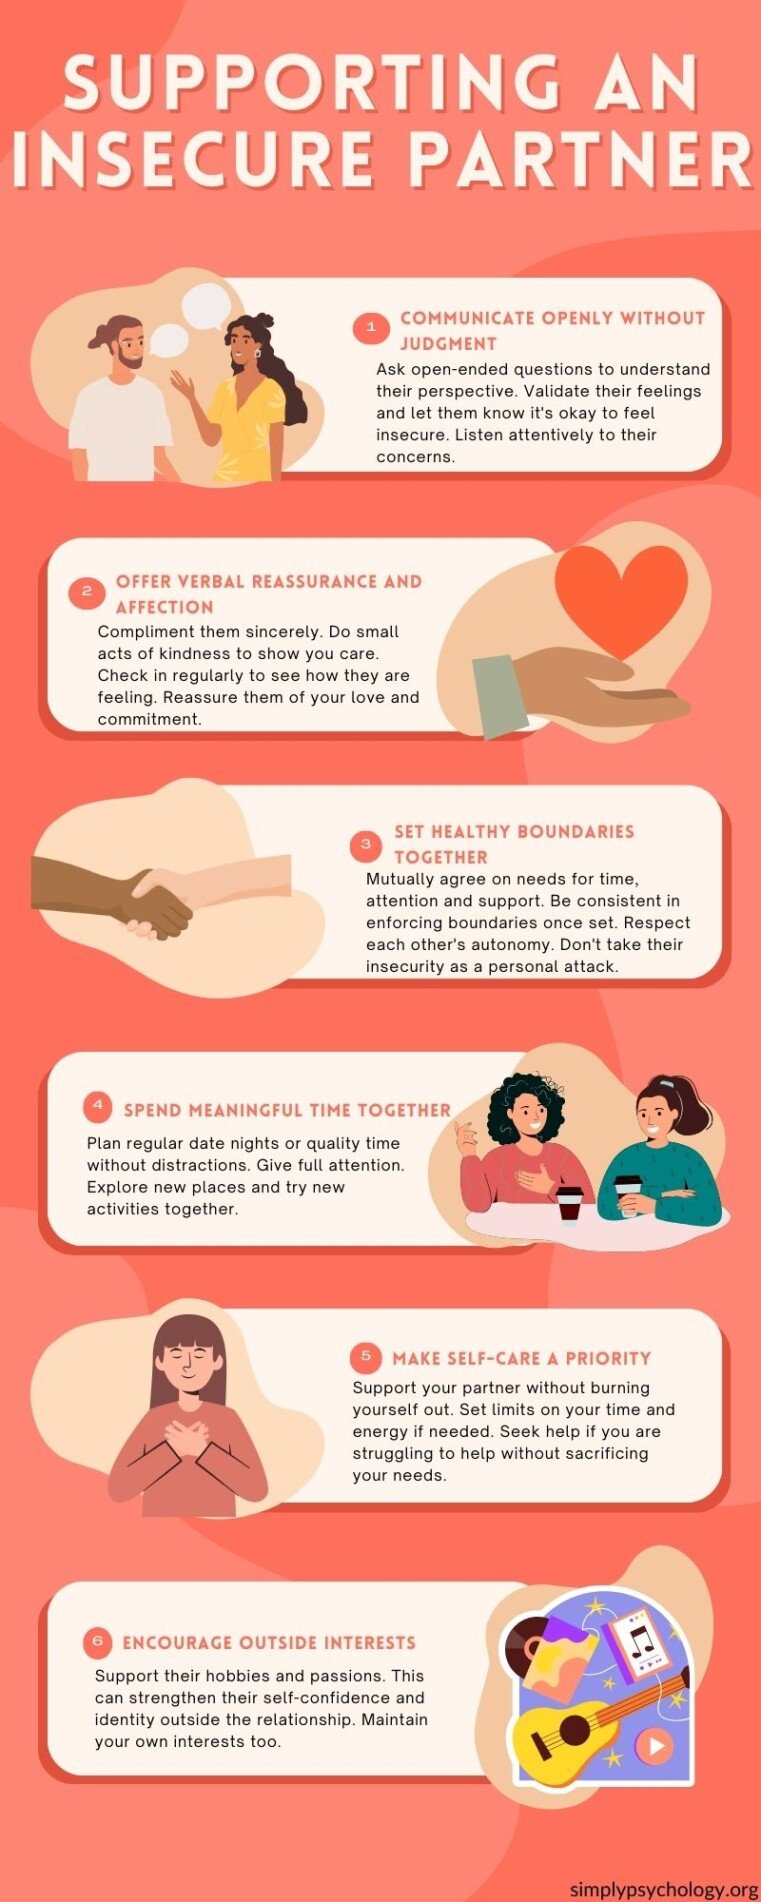 an infographic outlining 6 tips for supporting an insecure partner: Communicate openly without judgment. Ask open-ended questions to understand their perspective. Validate their feelings and let them know it's okay to feel insecure. Listen attentively to their concerns. Offer verbal reassurance and affection. Compliment them sincerely. Do small acts of kindness to show you care. Check in regularly to see how they are feeling. Reassure them of your love and commitment. Set healthy boundaries together. Mutually agree on needs for time, attention and support. Be consistent in enforcing boundaries once set. Respect each other's autonomy. Don't take their insecurity as a personal attack. Make self-care a priority. Support your partner without burning yourself out. Set limits on your time and energy if needed. Seek help if you are struggling to help without sacrificing your needs. Spend meaningful time together. Plan regular date nights or quality time without distractions. Give full attention. Explore new places and try new activities together. Encourage outside interests. Support their hobbies and passions. This can strengthen their self-confidence and identity outside the relationship. Maintain your own interests too.